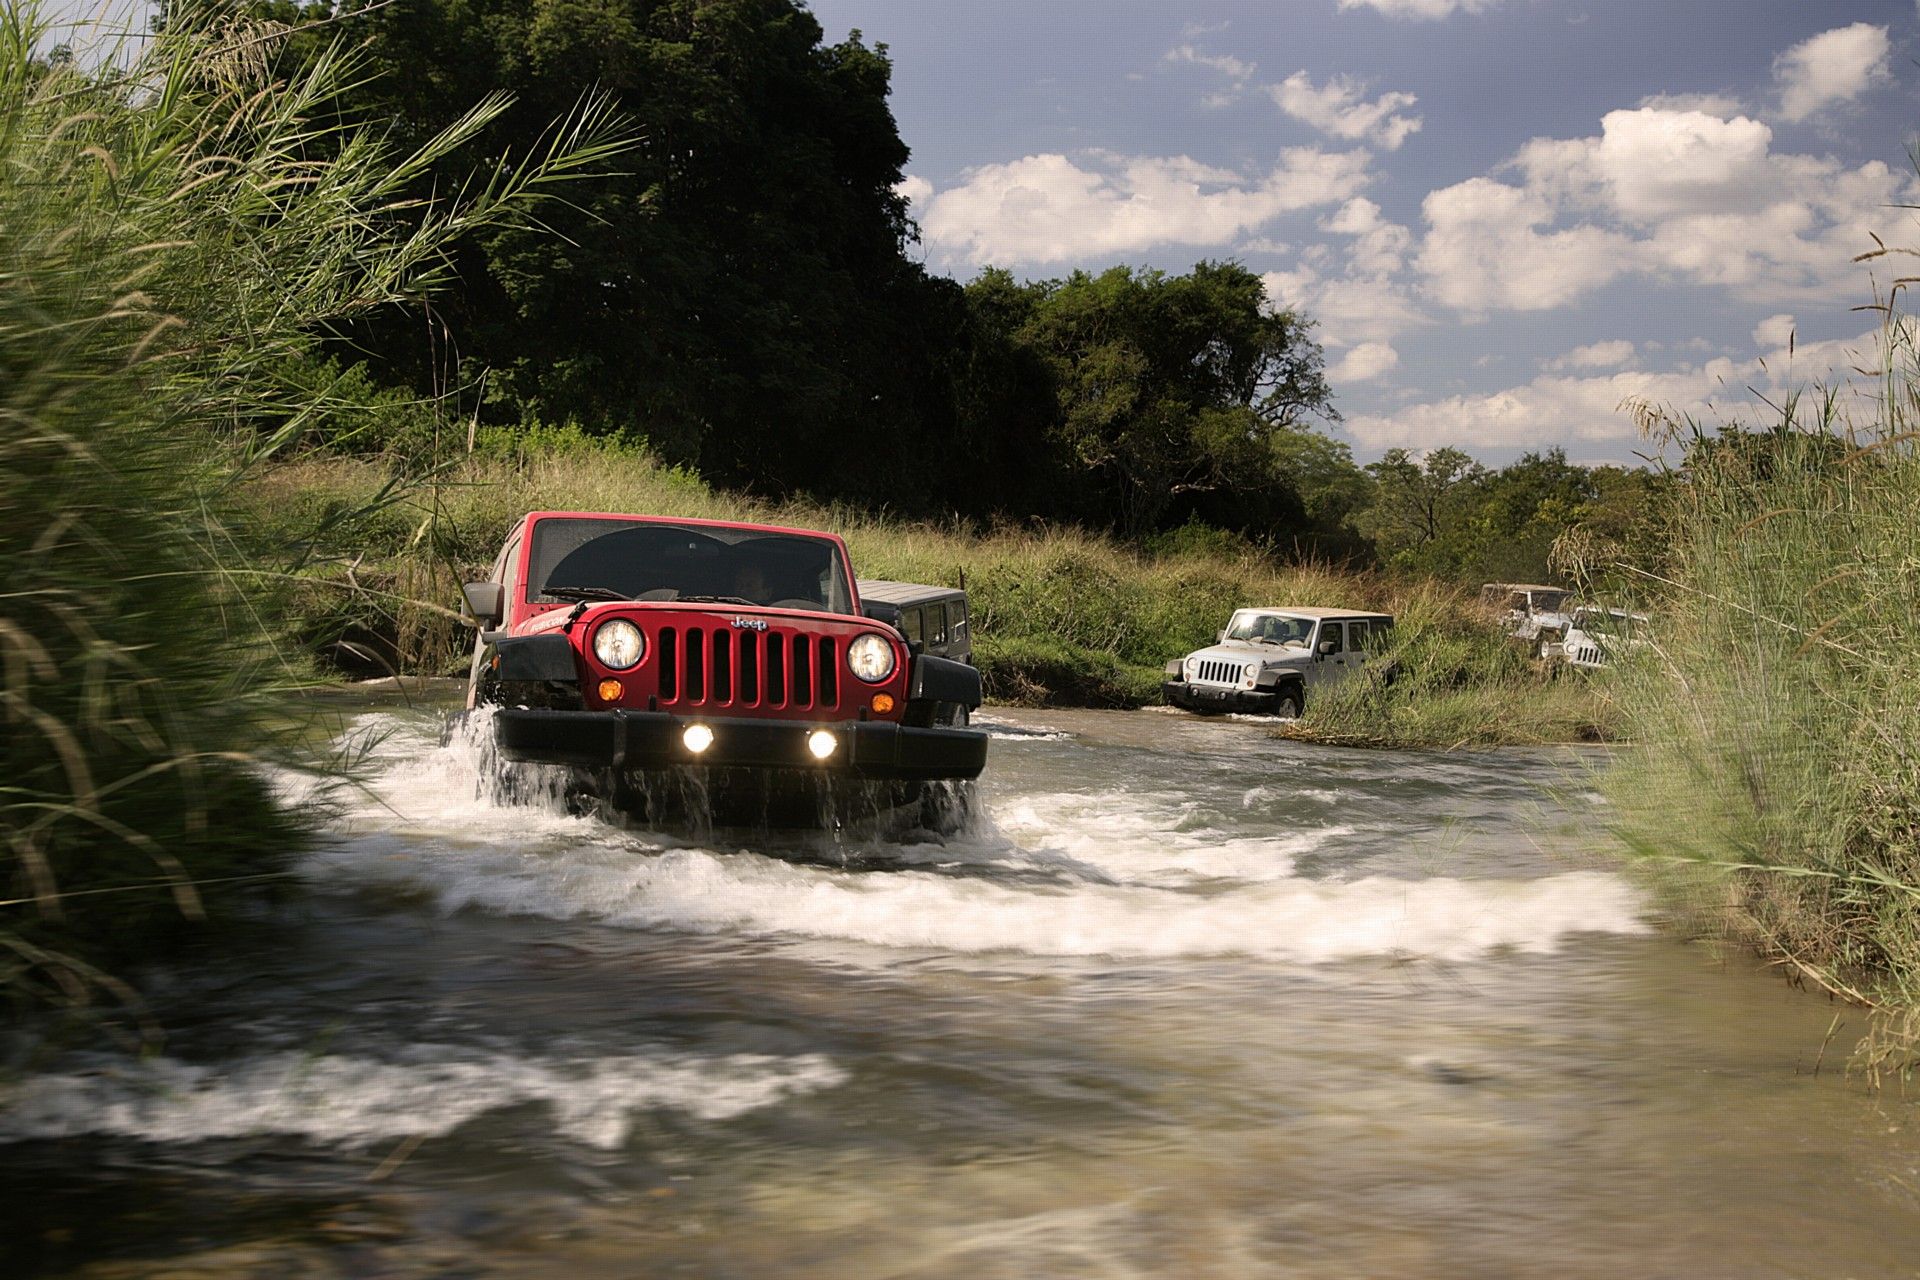 Hd Quality Images Of Jeep Wrangler » , HD Wallpaper & Backgrounds